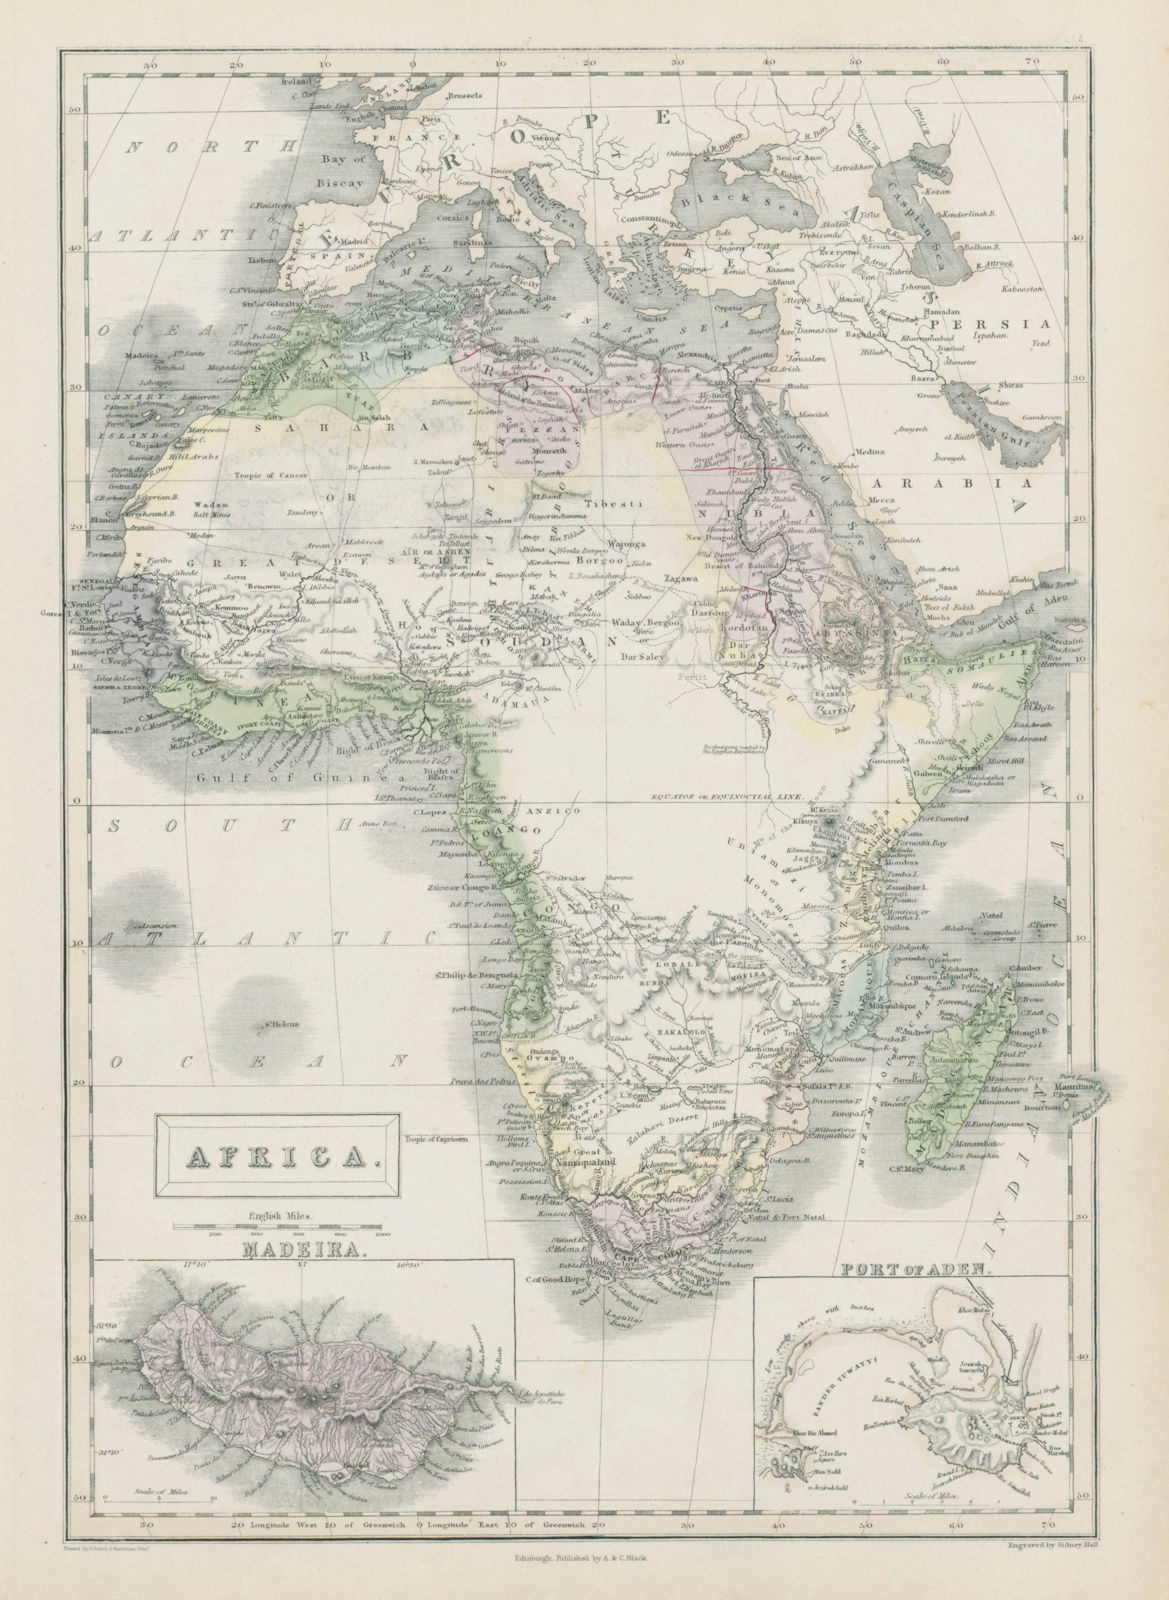 Early colonial Africa. Inset Madeira & Aden. SIDNEY HALL 1856 old antique map